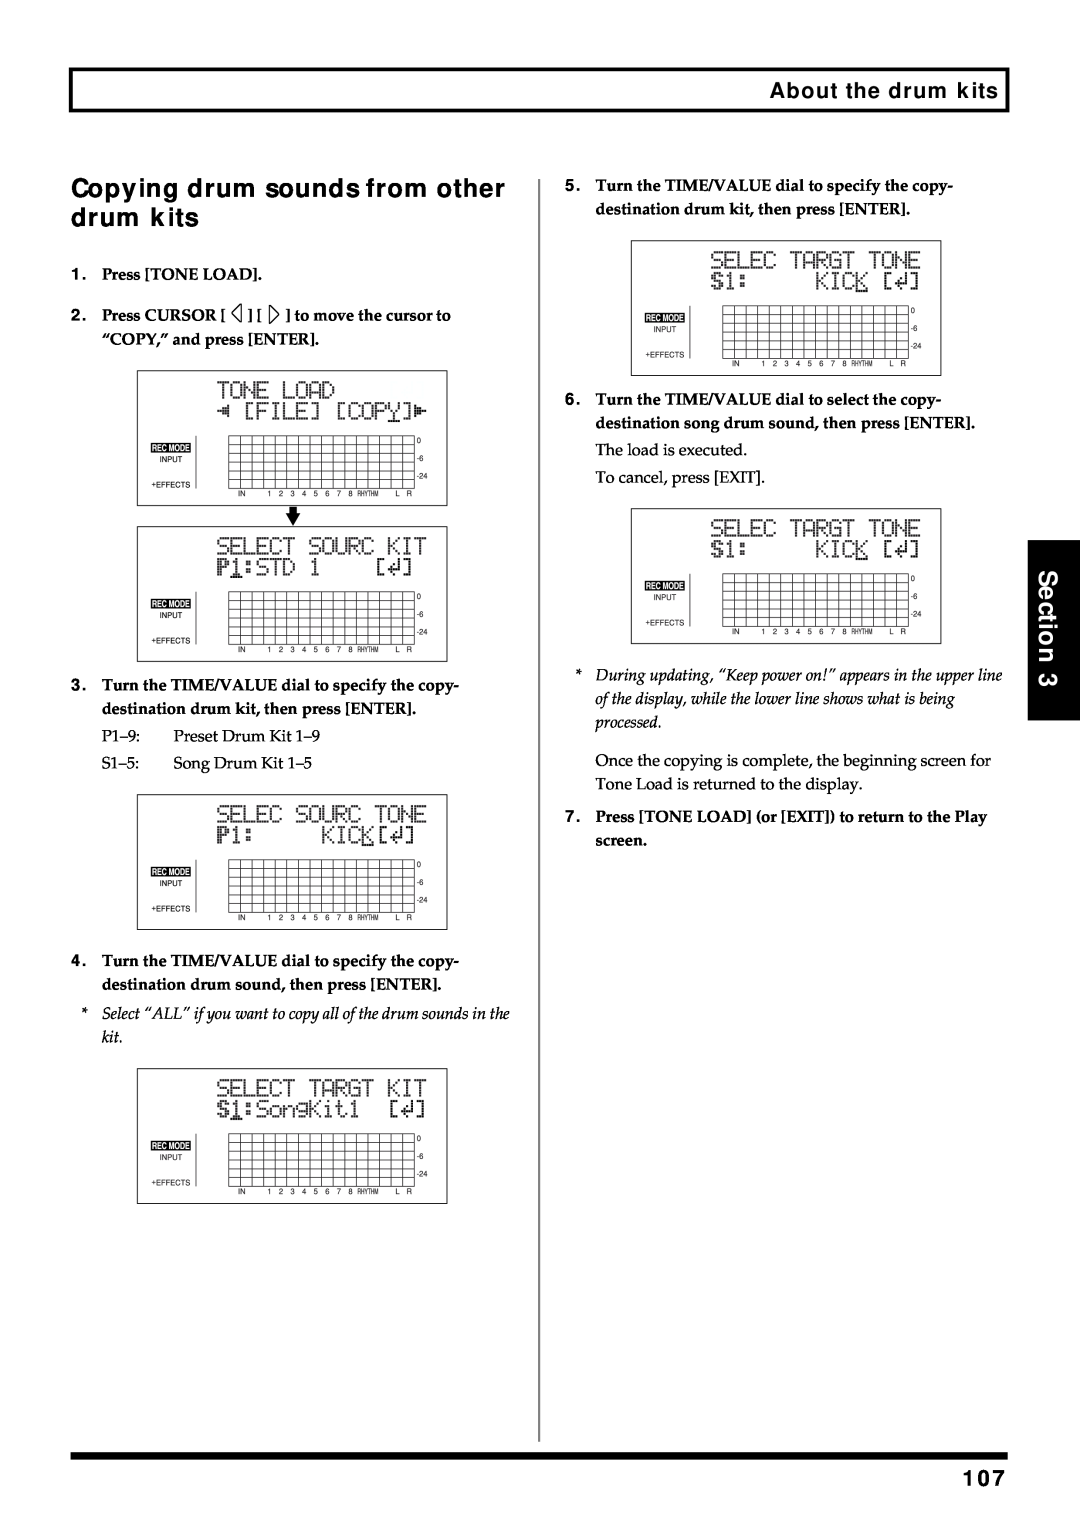 Roland BR-864 owner manual Copying drum sounds from other drum kits, Section, About the drum kits 